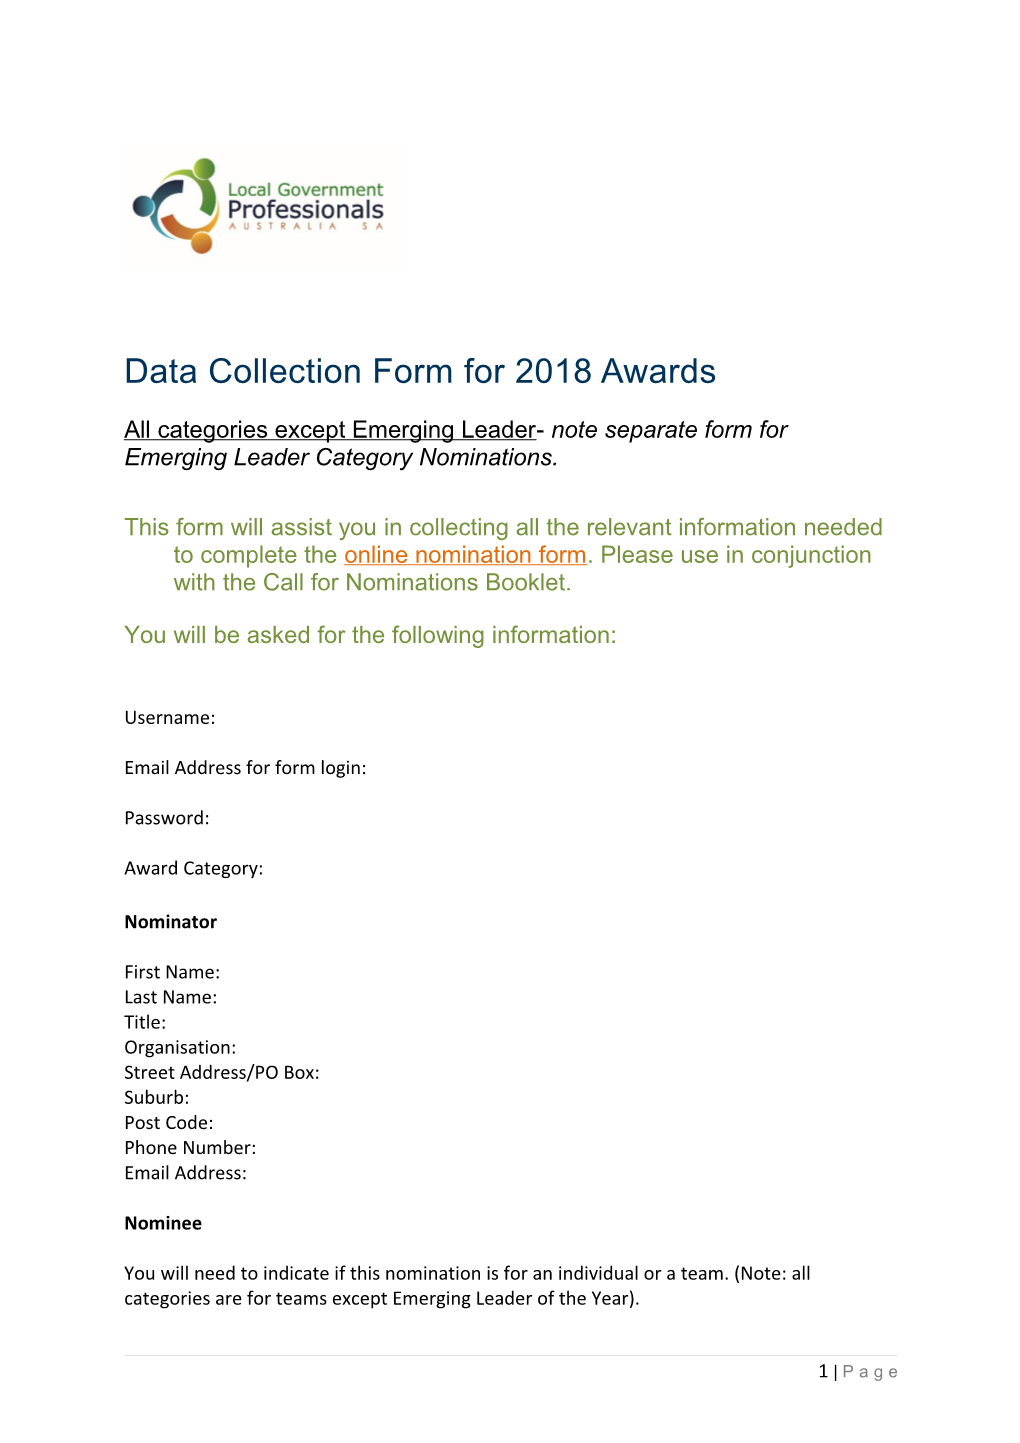 Data Collection Form for 2018 Awards